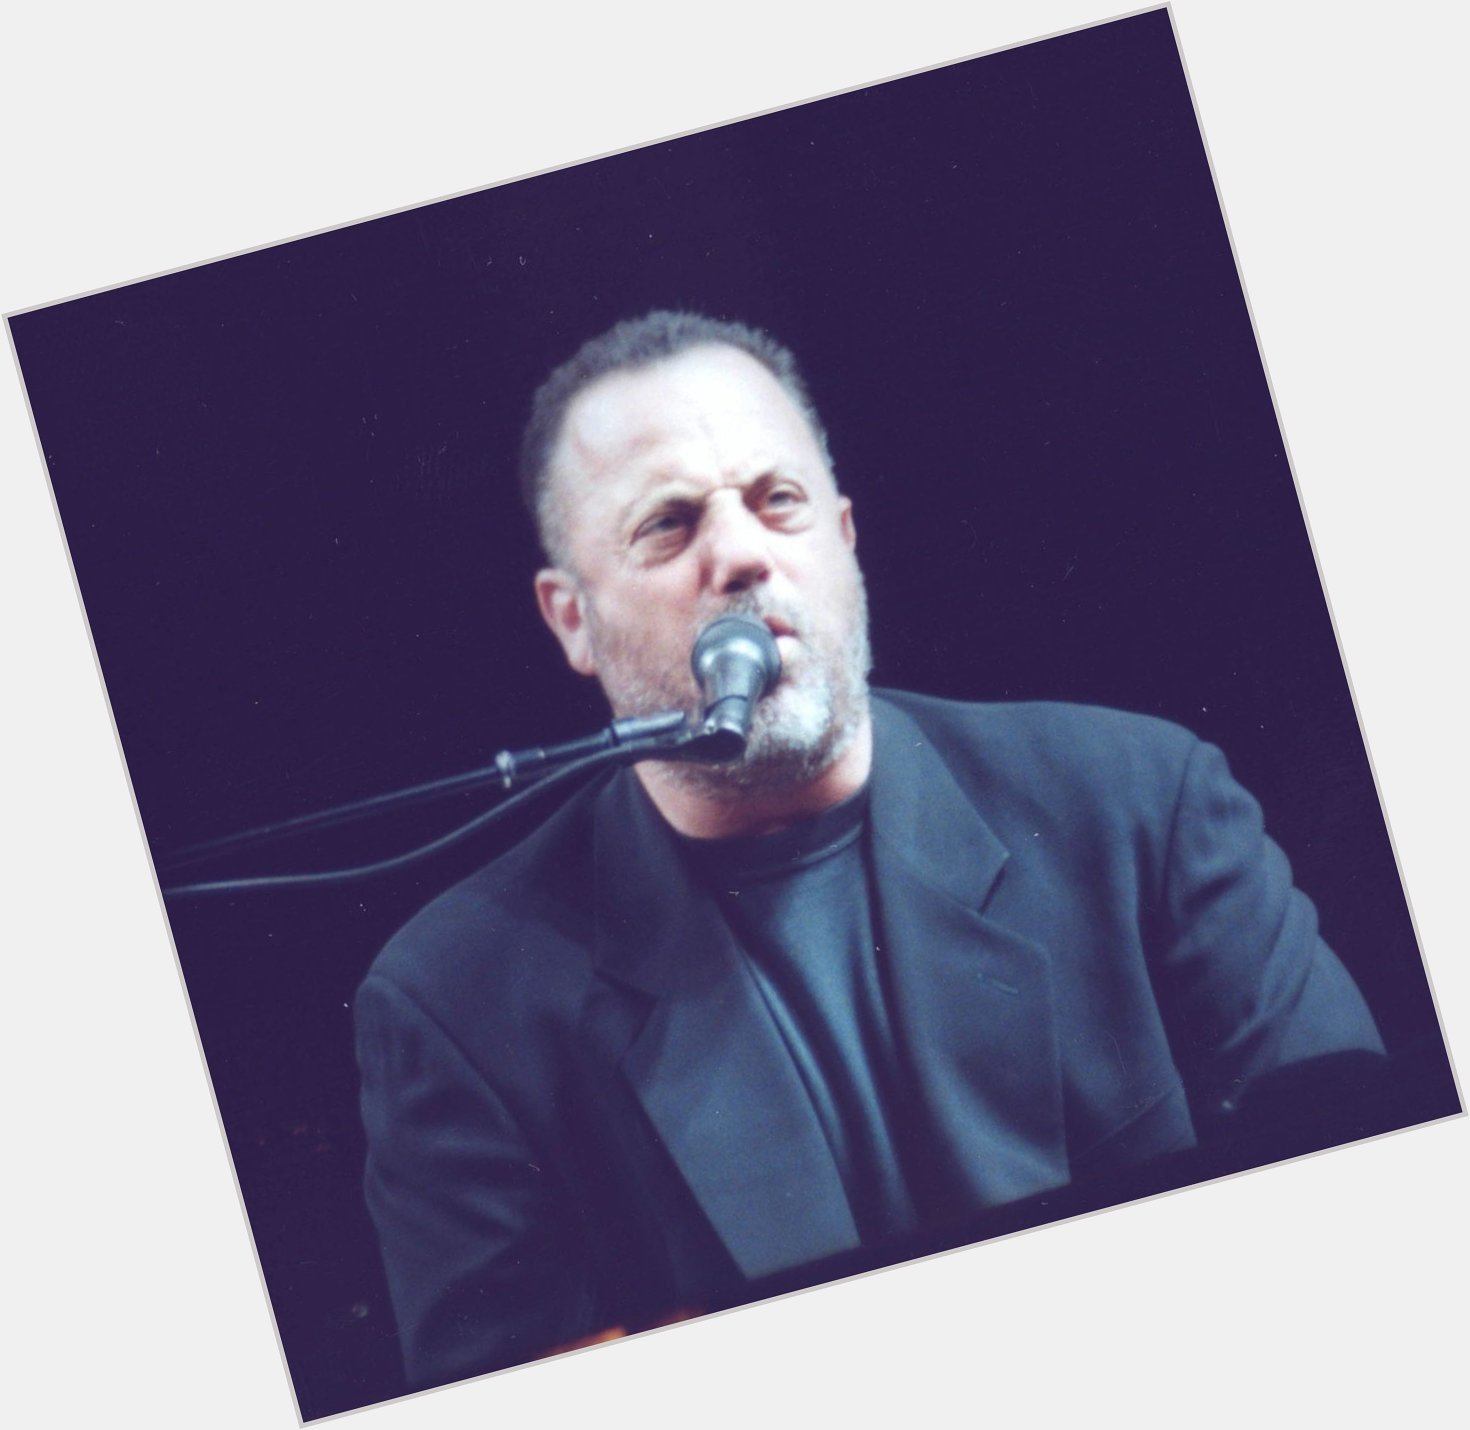 Happy birthday, Piano Man!
Billy Joel turns 72 today. 
Who was at The Schott to see him in 1998? 